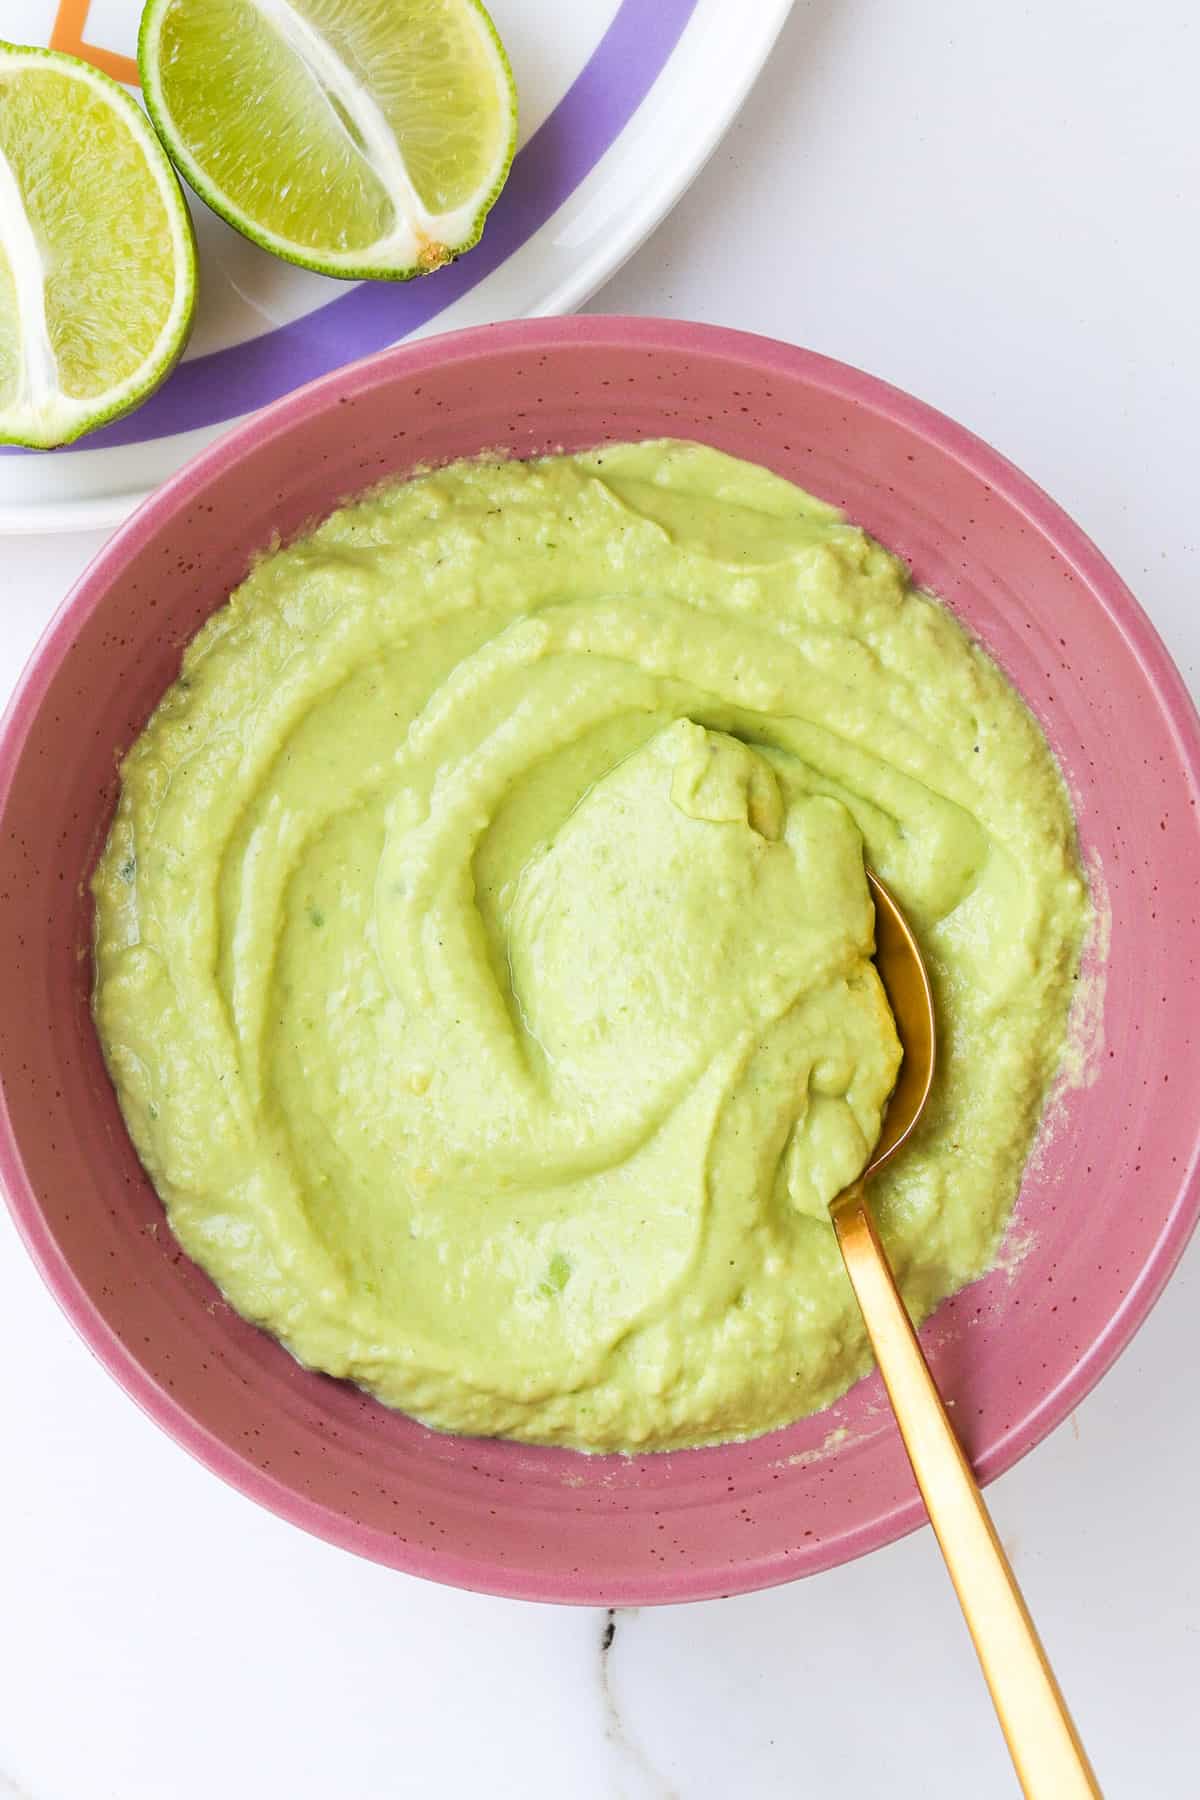 Avocado crema in a pink bowl with a gold spoon.